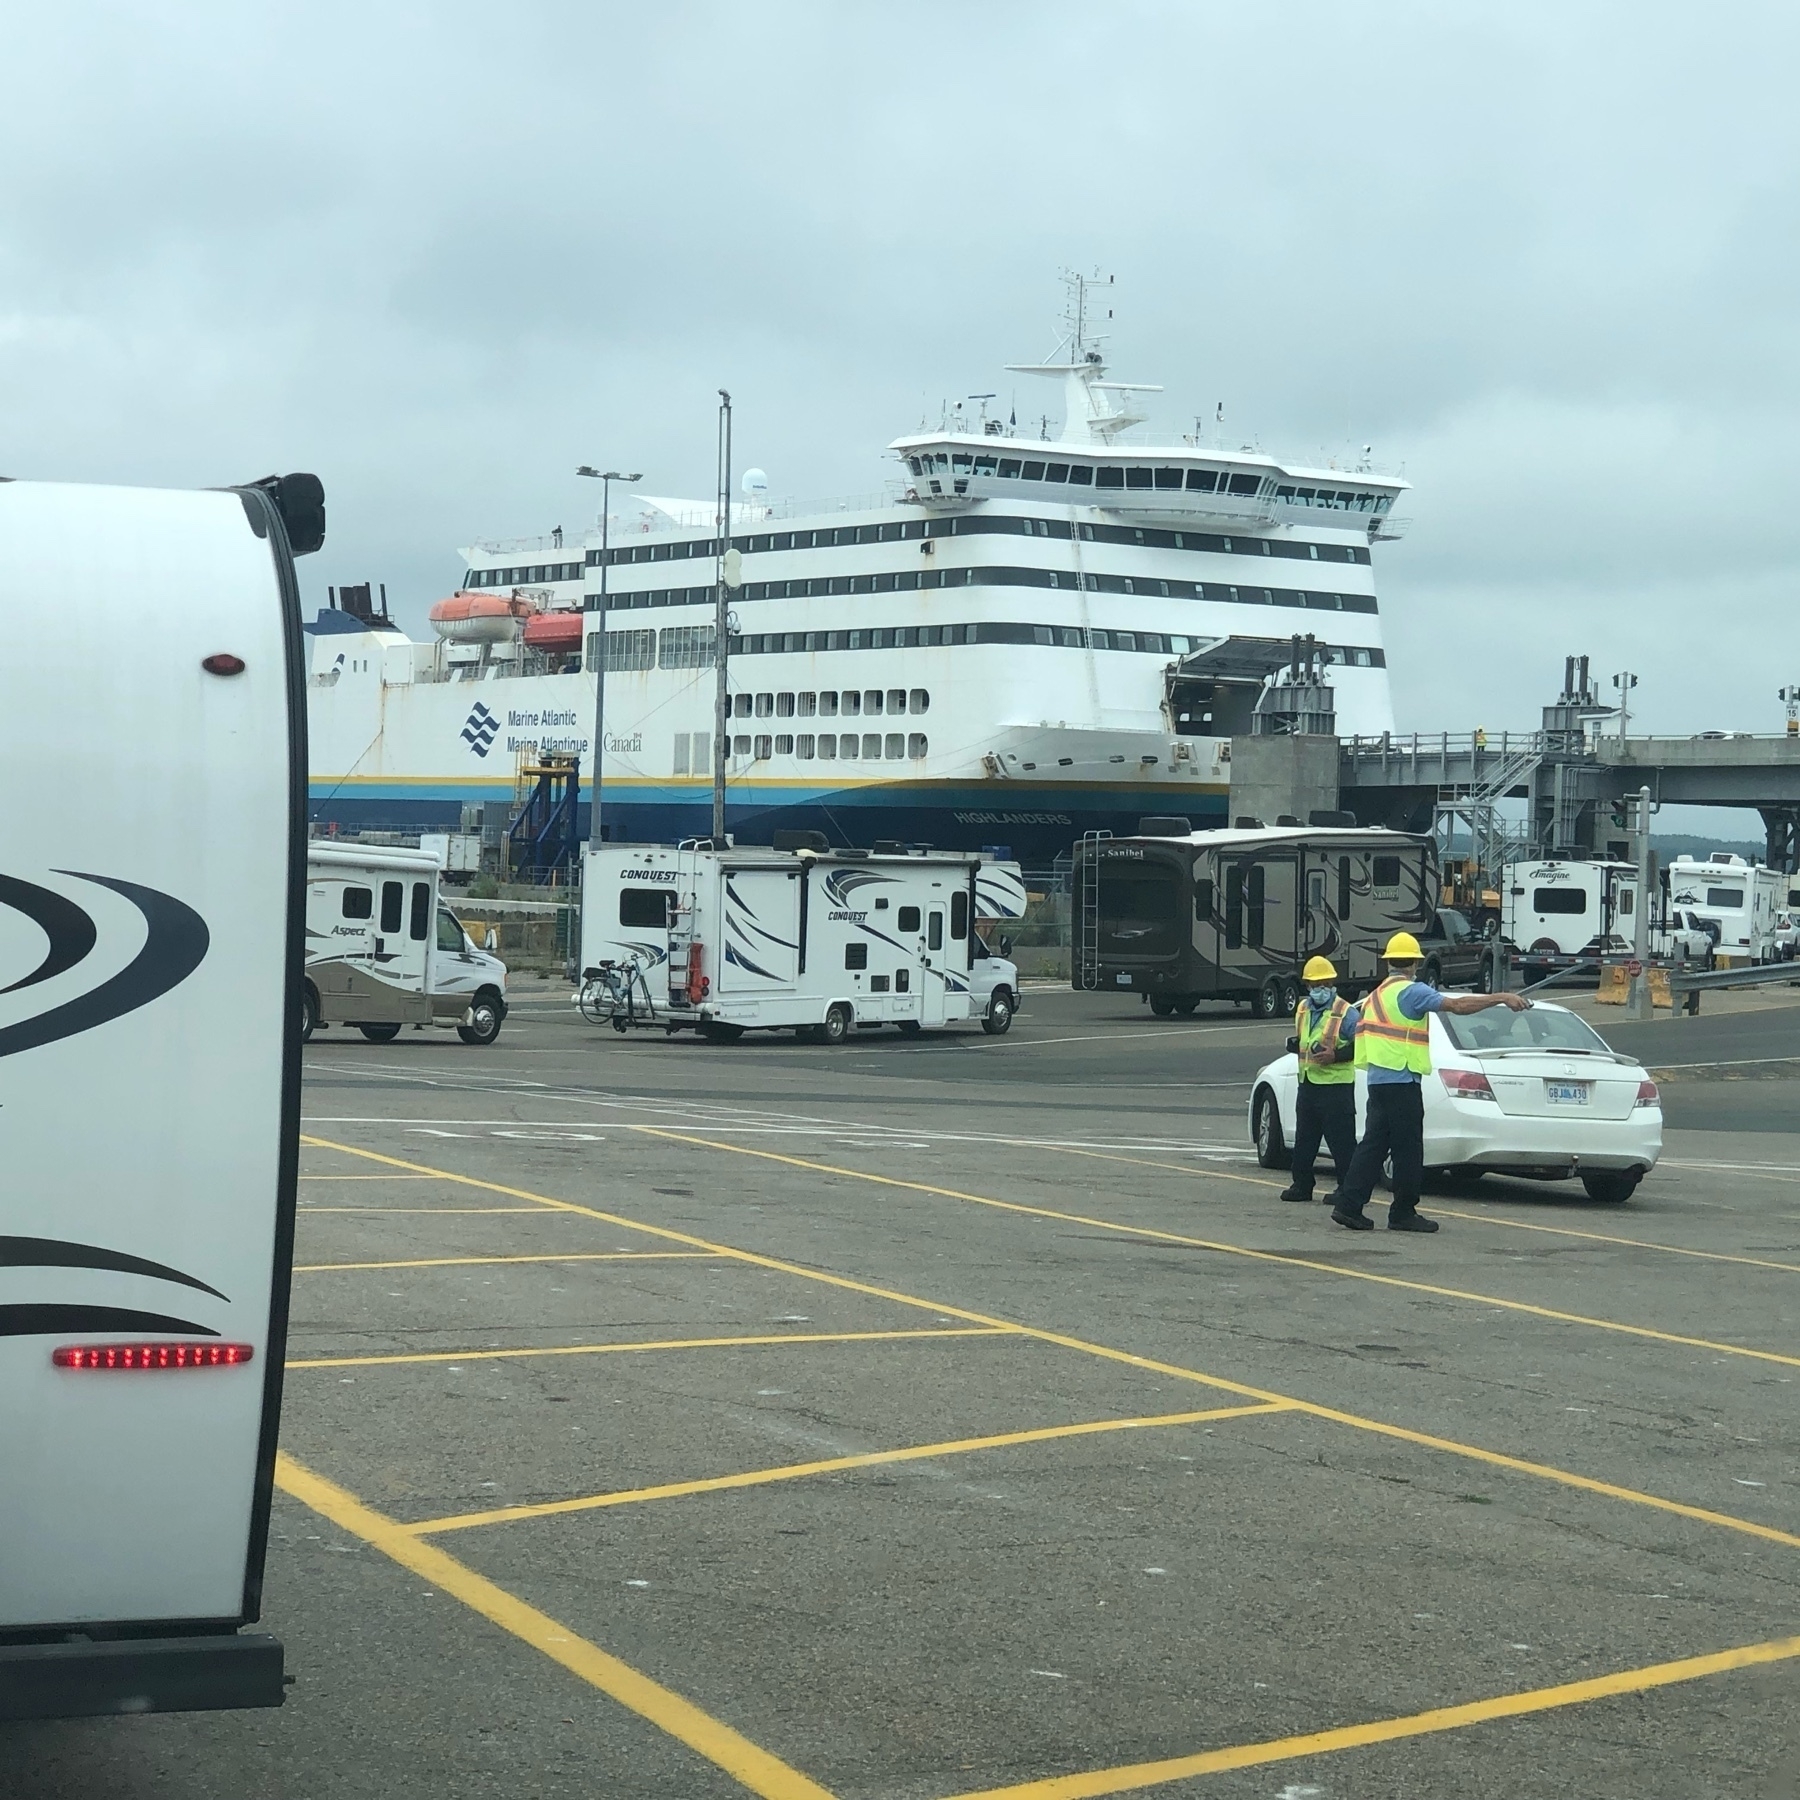 R Vs lined up to enter a large ferry